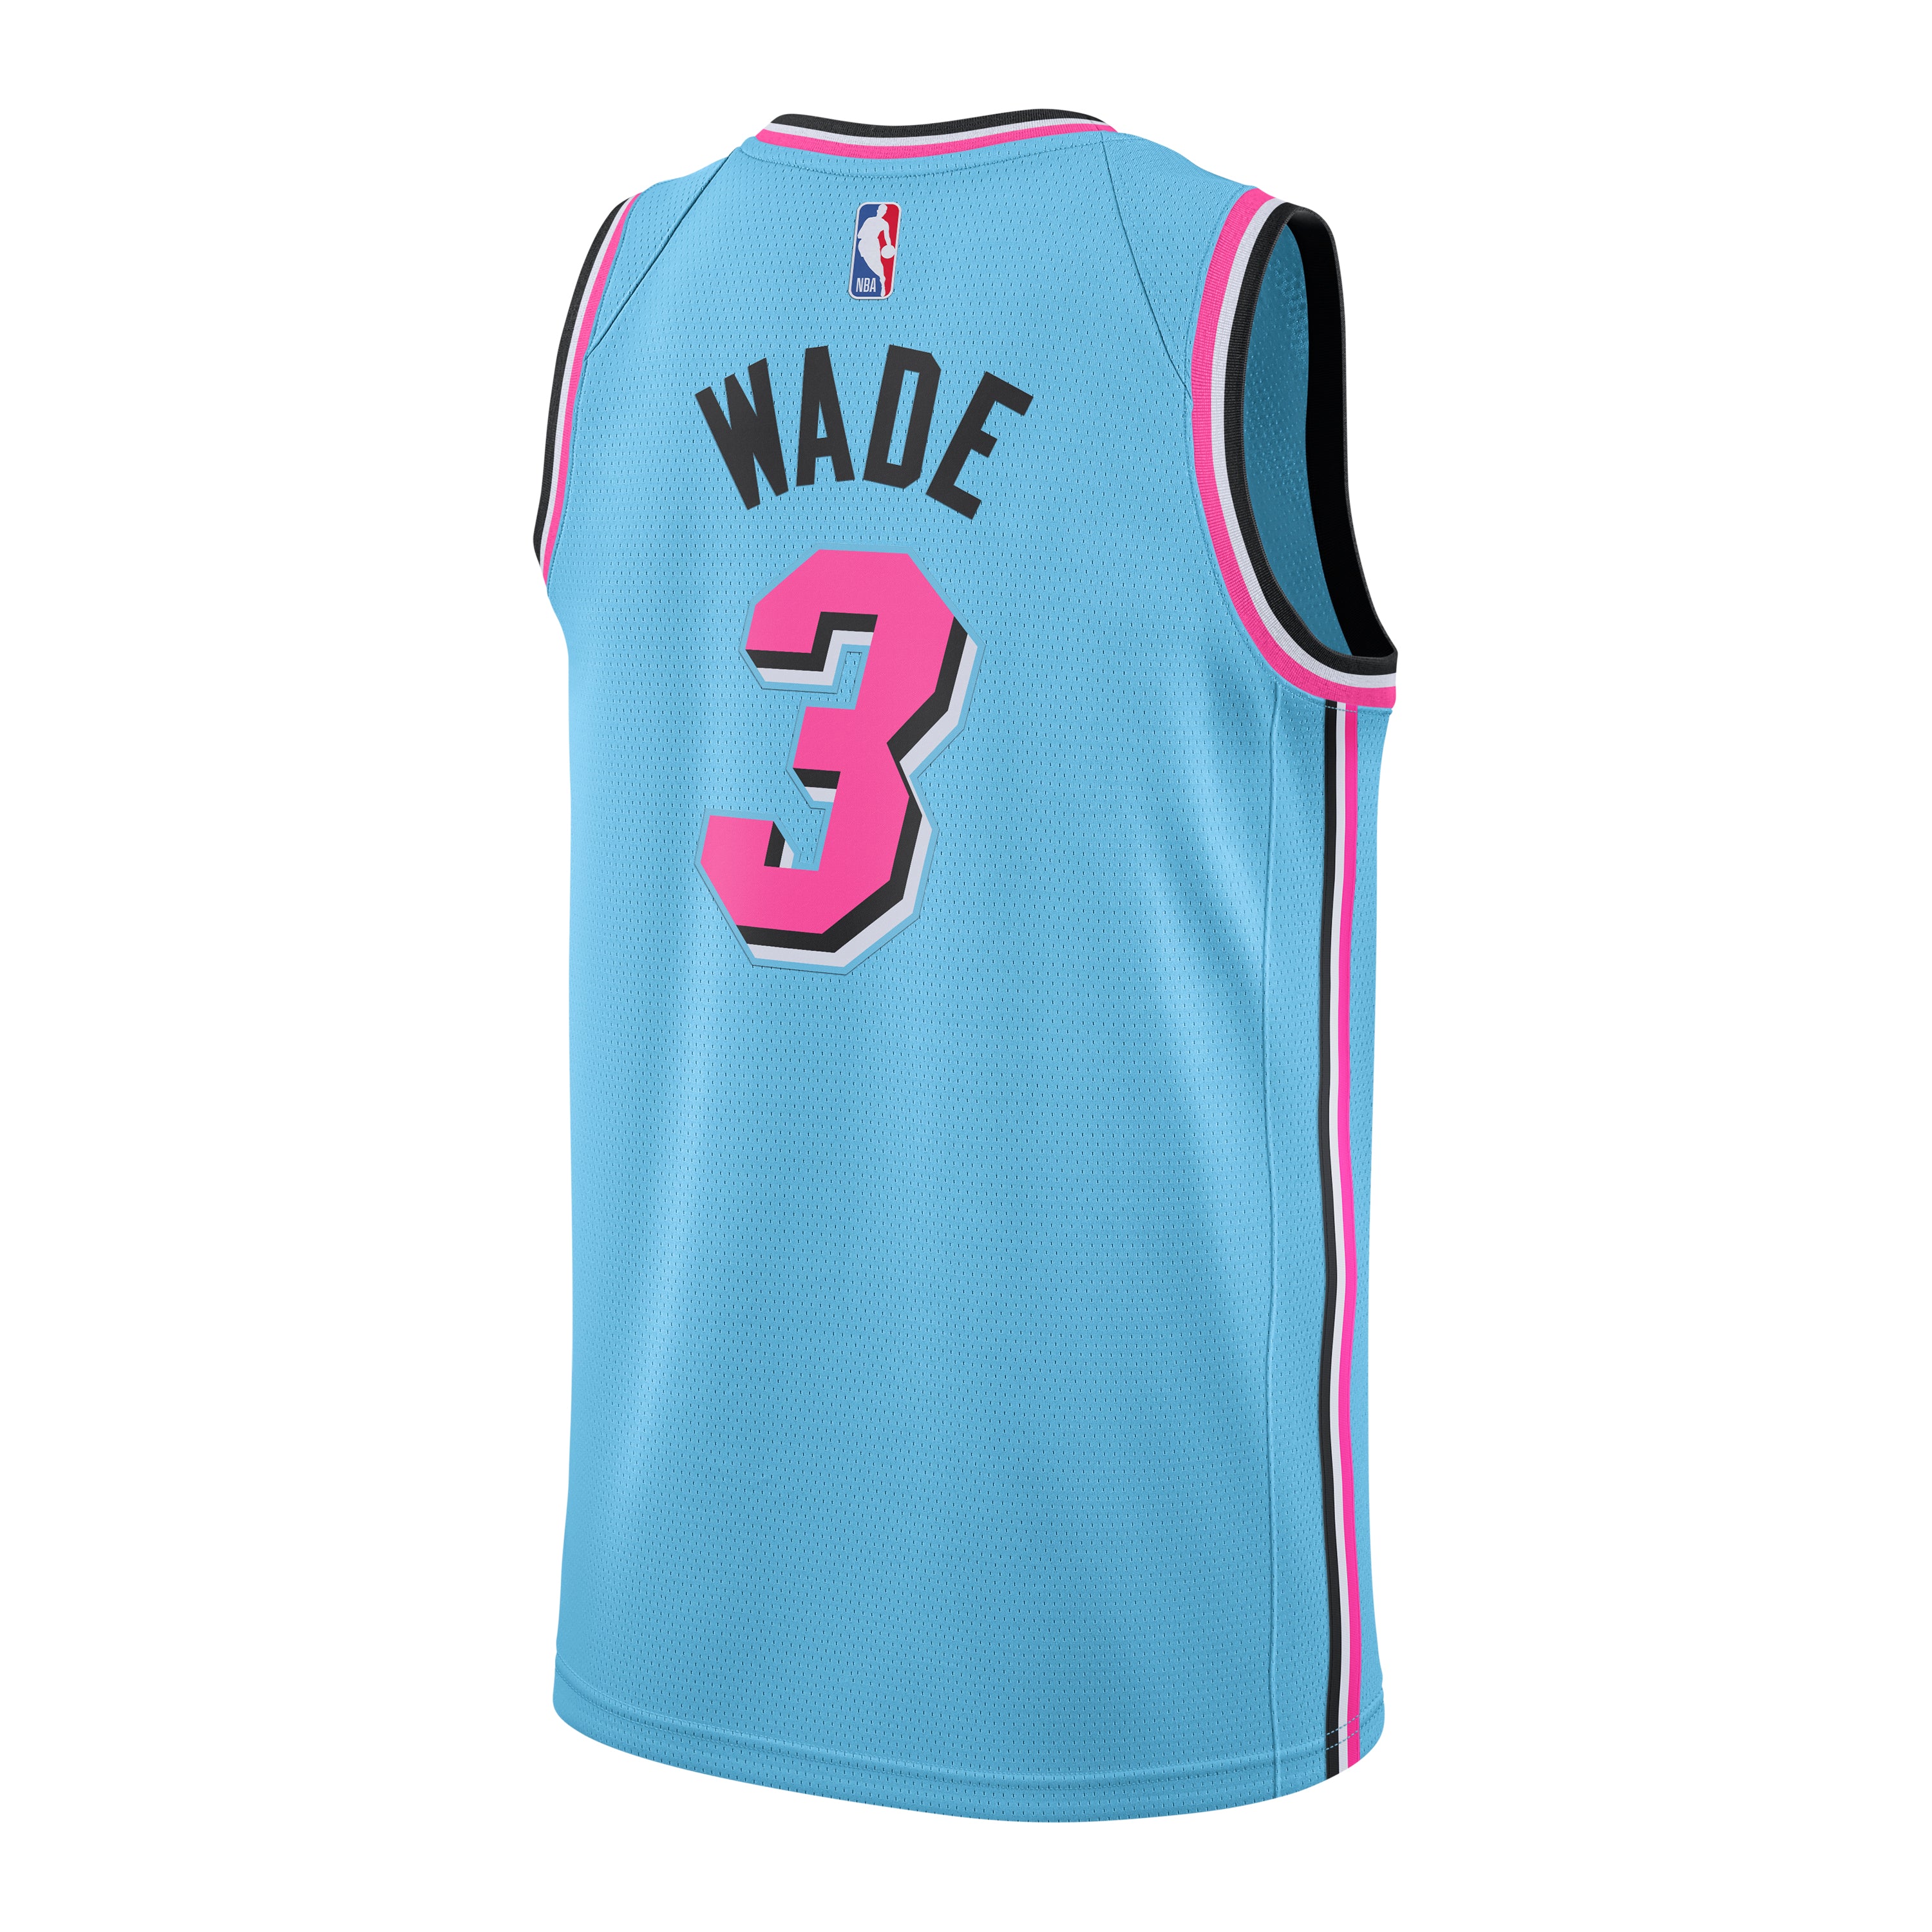 How Miami's 'Vice' Jersey Became the NBA's Hottest Uniform